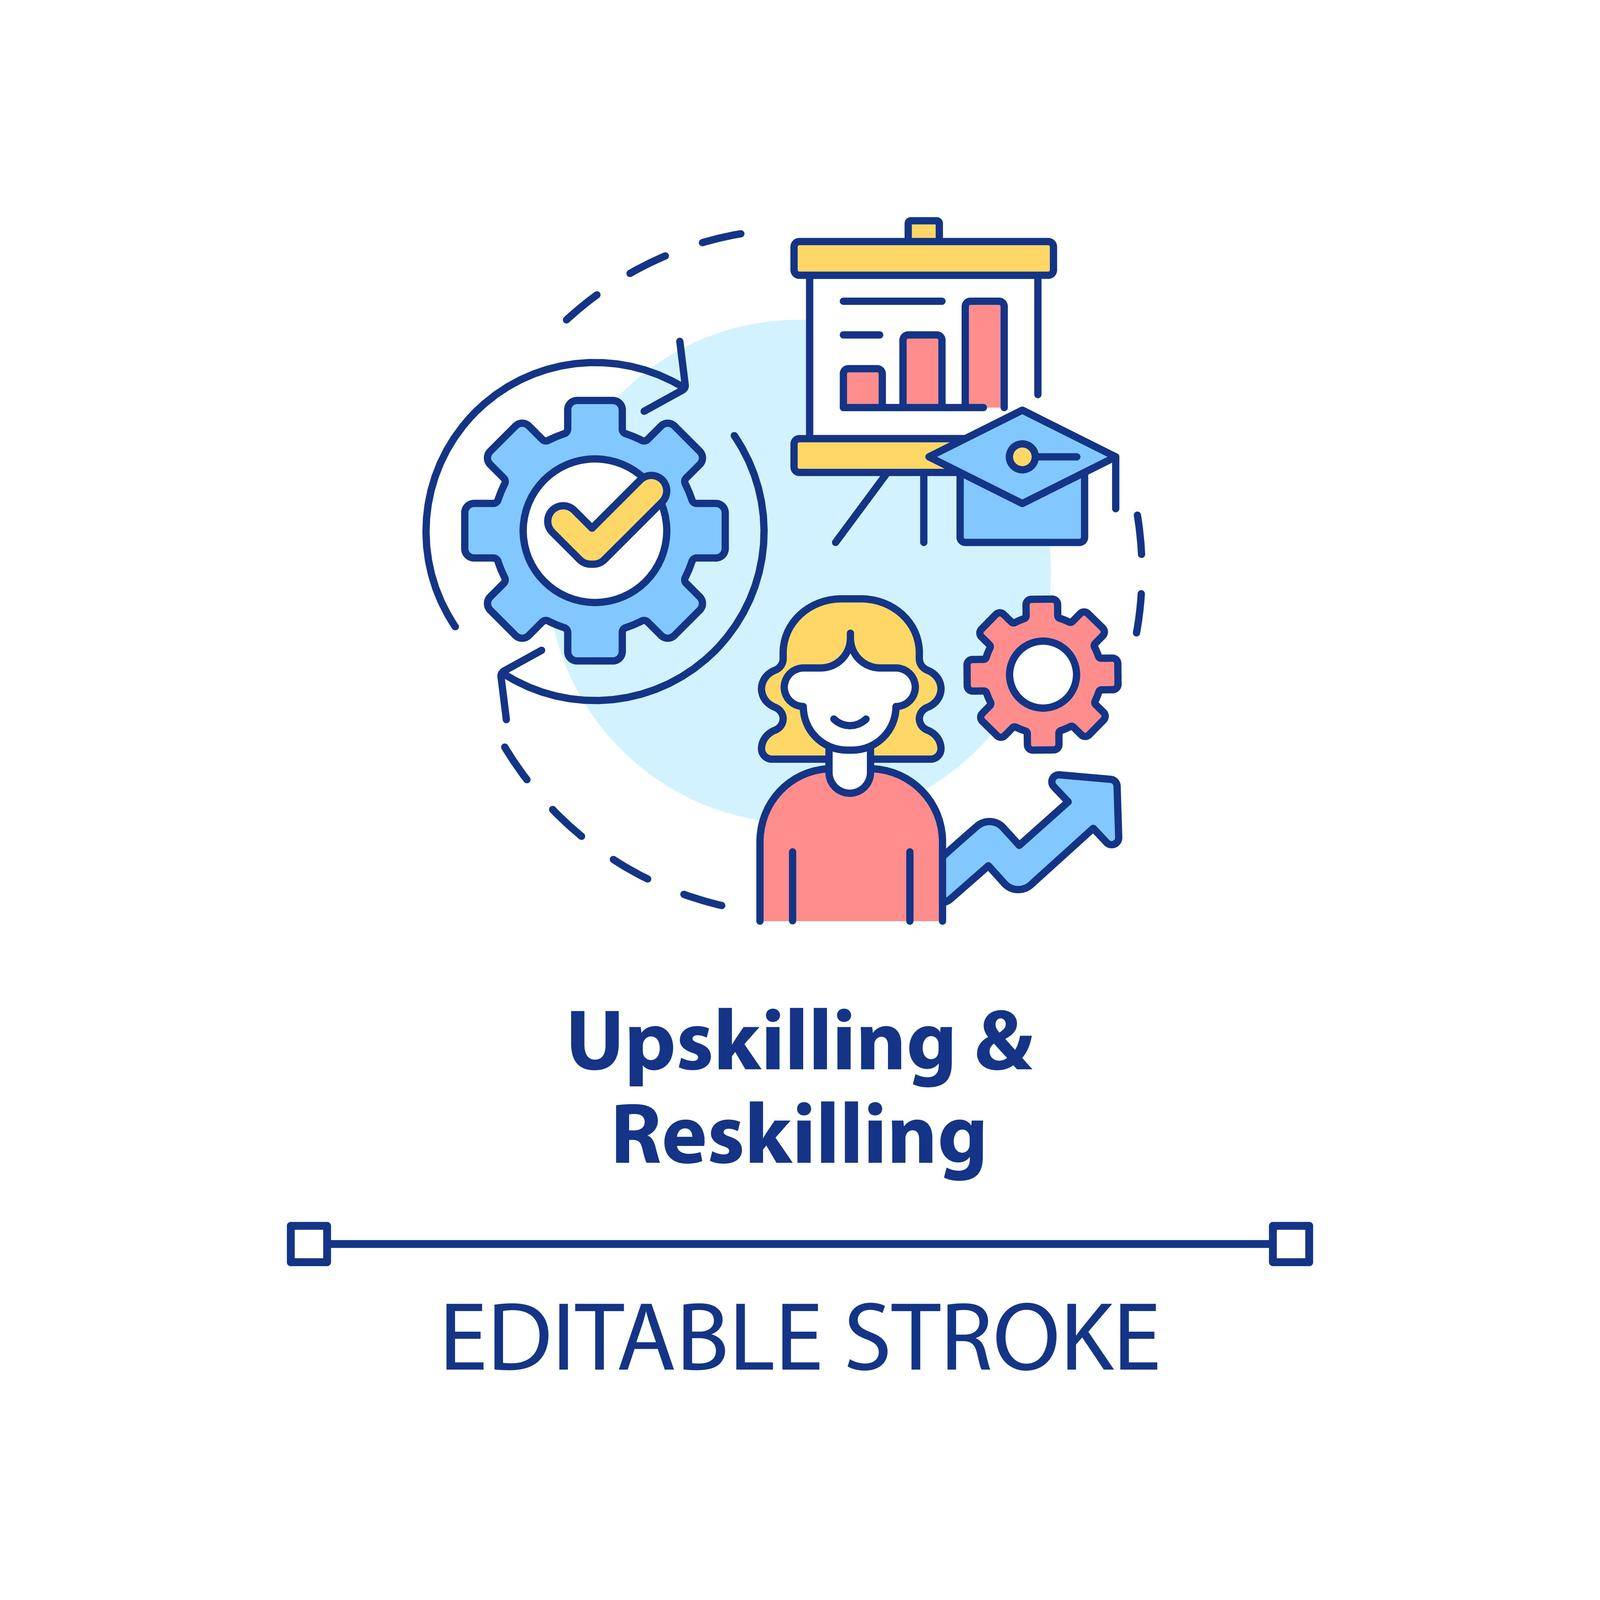 Upskilling and reskilling concept icon by bsd